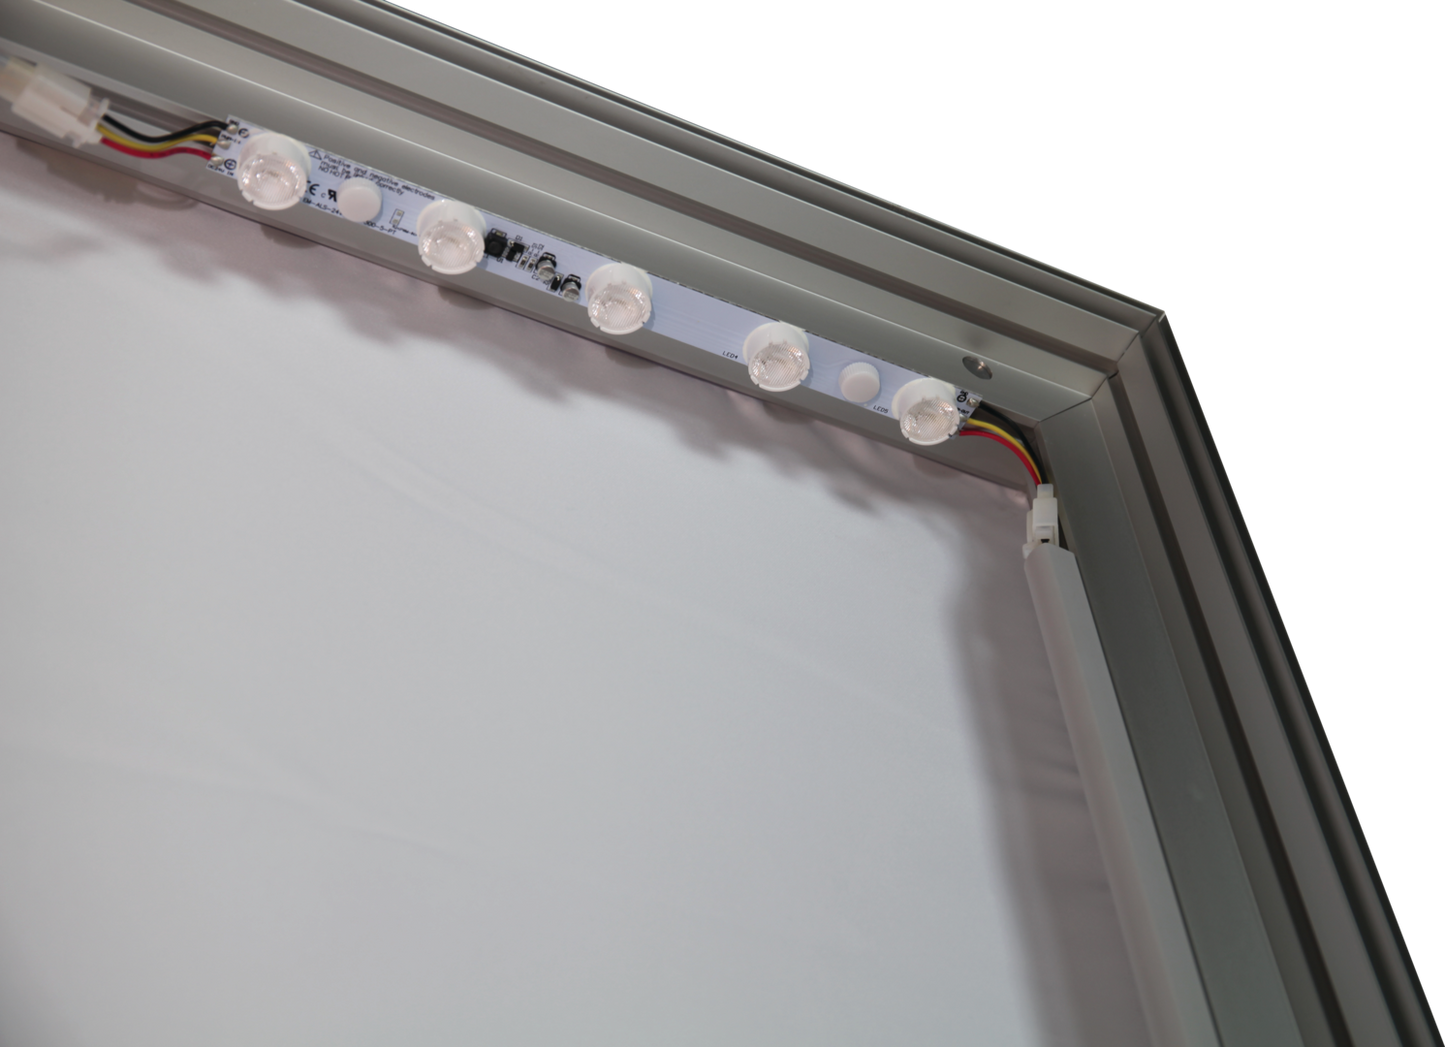 40ft x 3ft Vector Frame Hanging Light Box Single-Sided (Graphic Package)